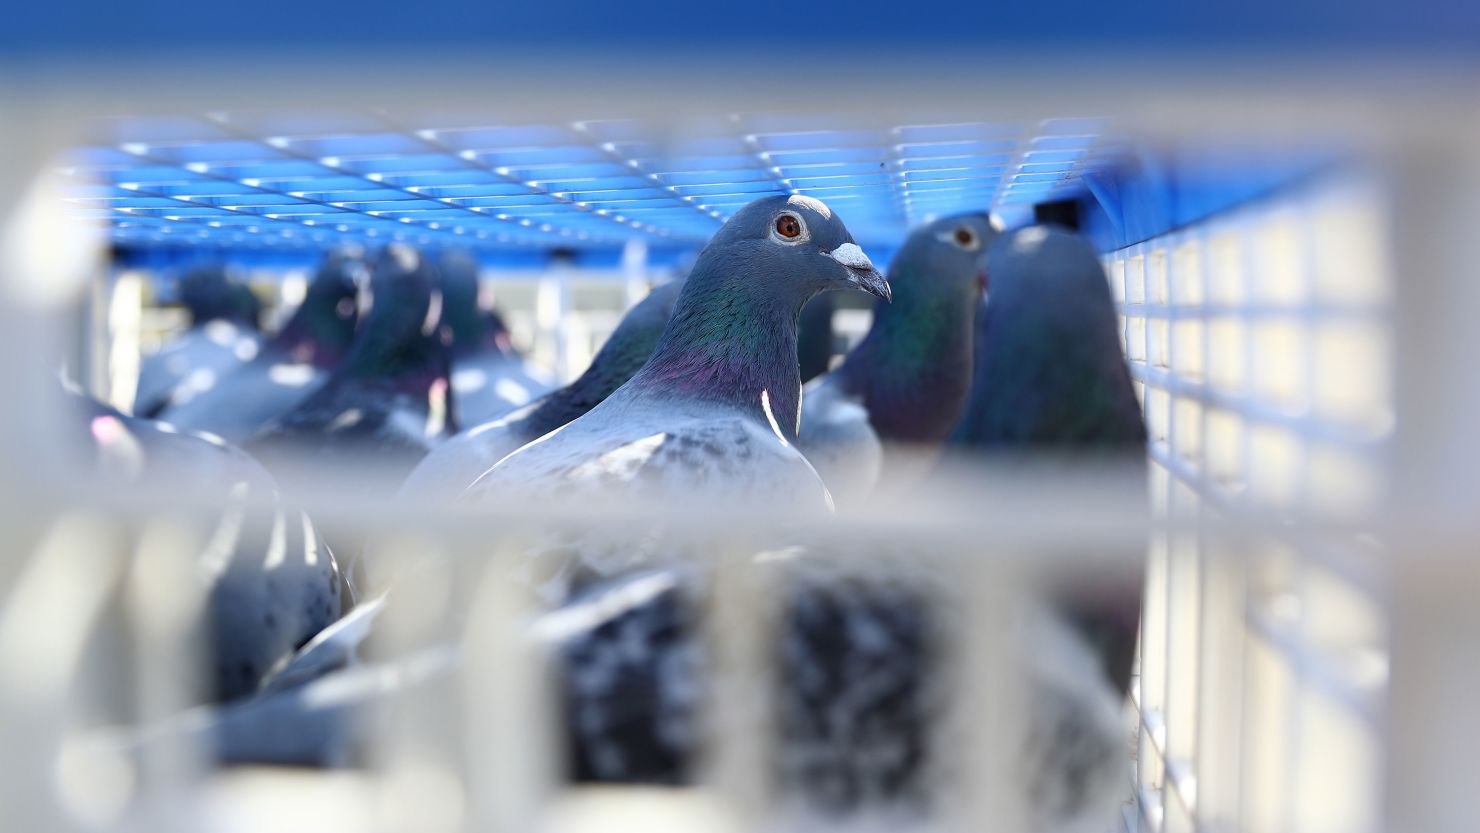 Racing pigeons, not those being sent to the Barcelona event, in a cage.